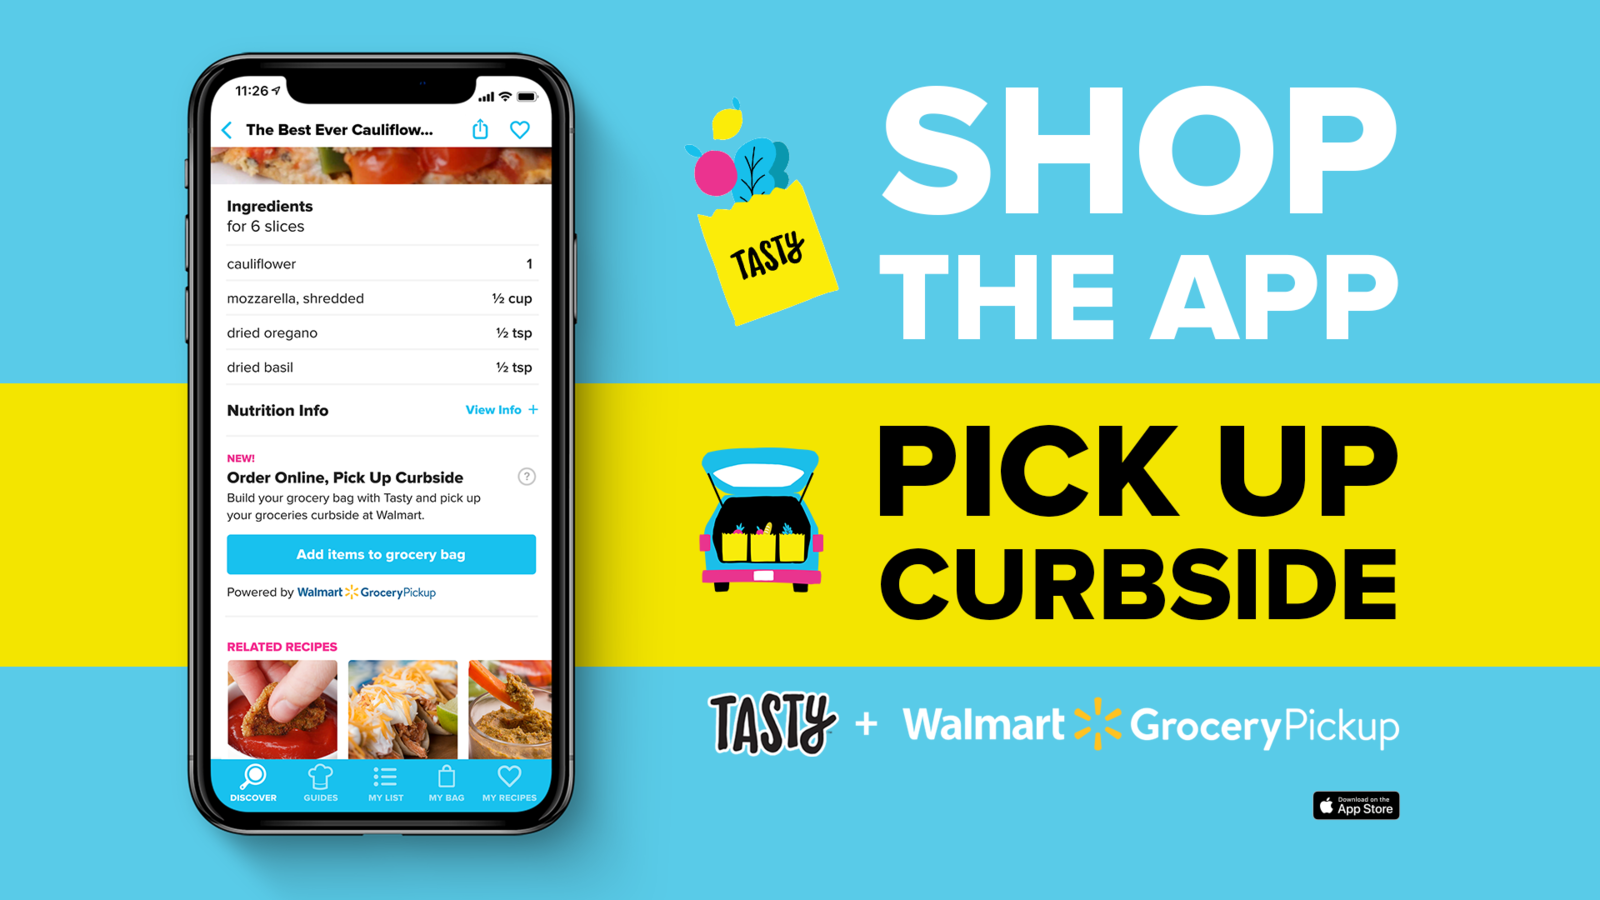 Advertisement showing a phone with a grocery app, promoting curbside pickup at a grocery store